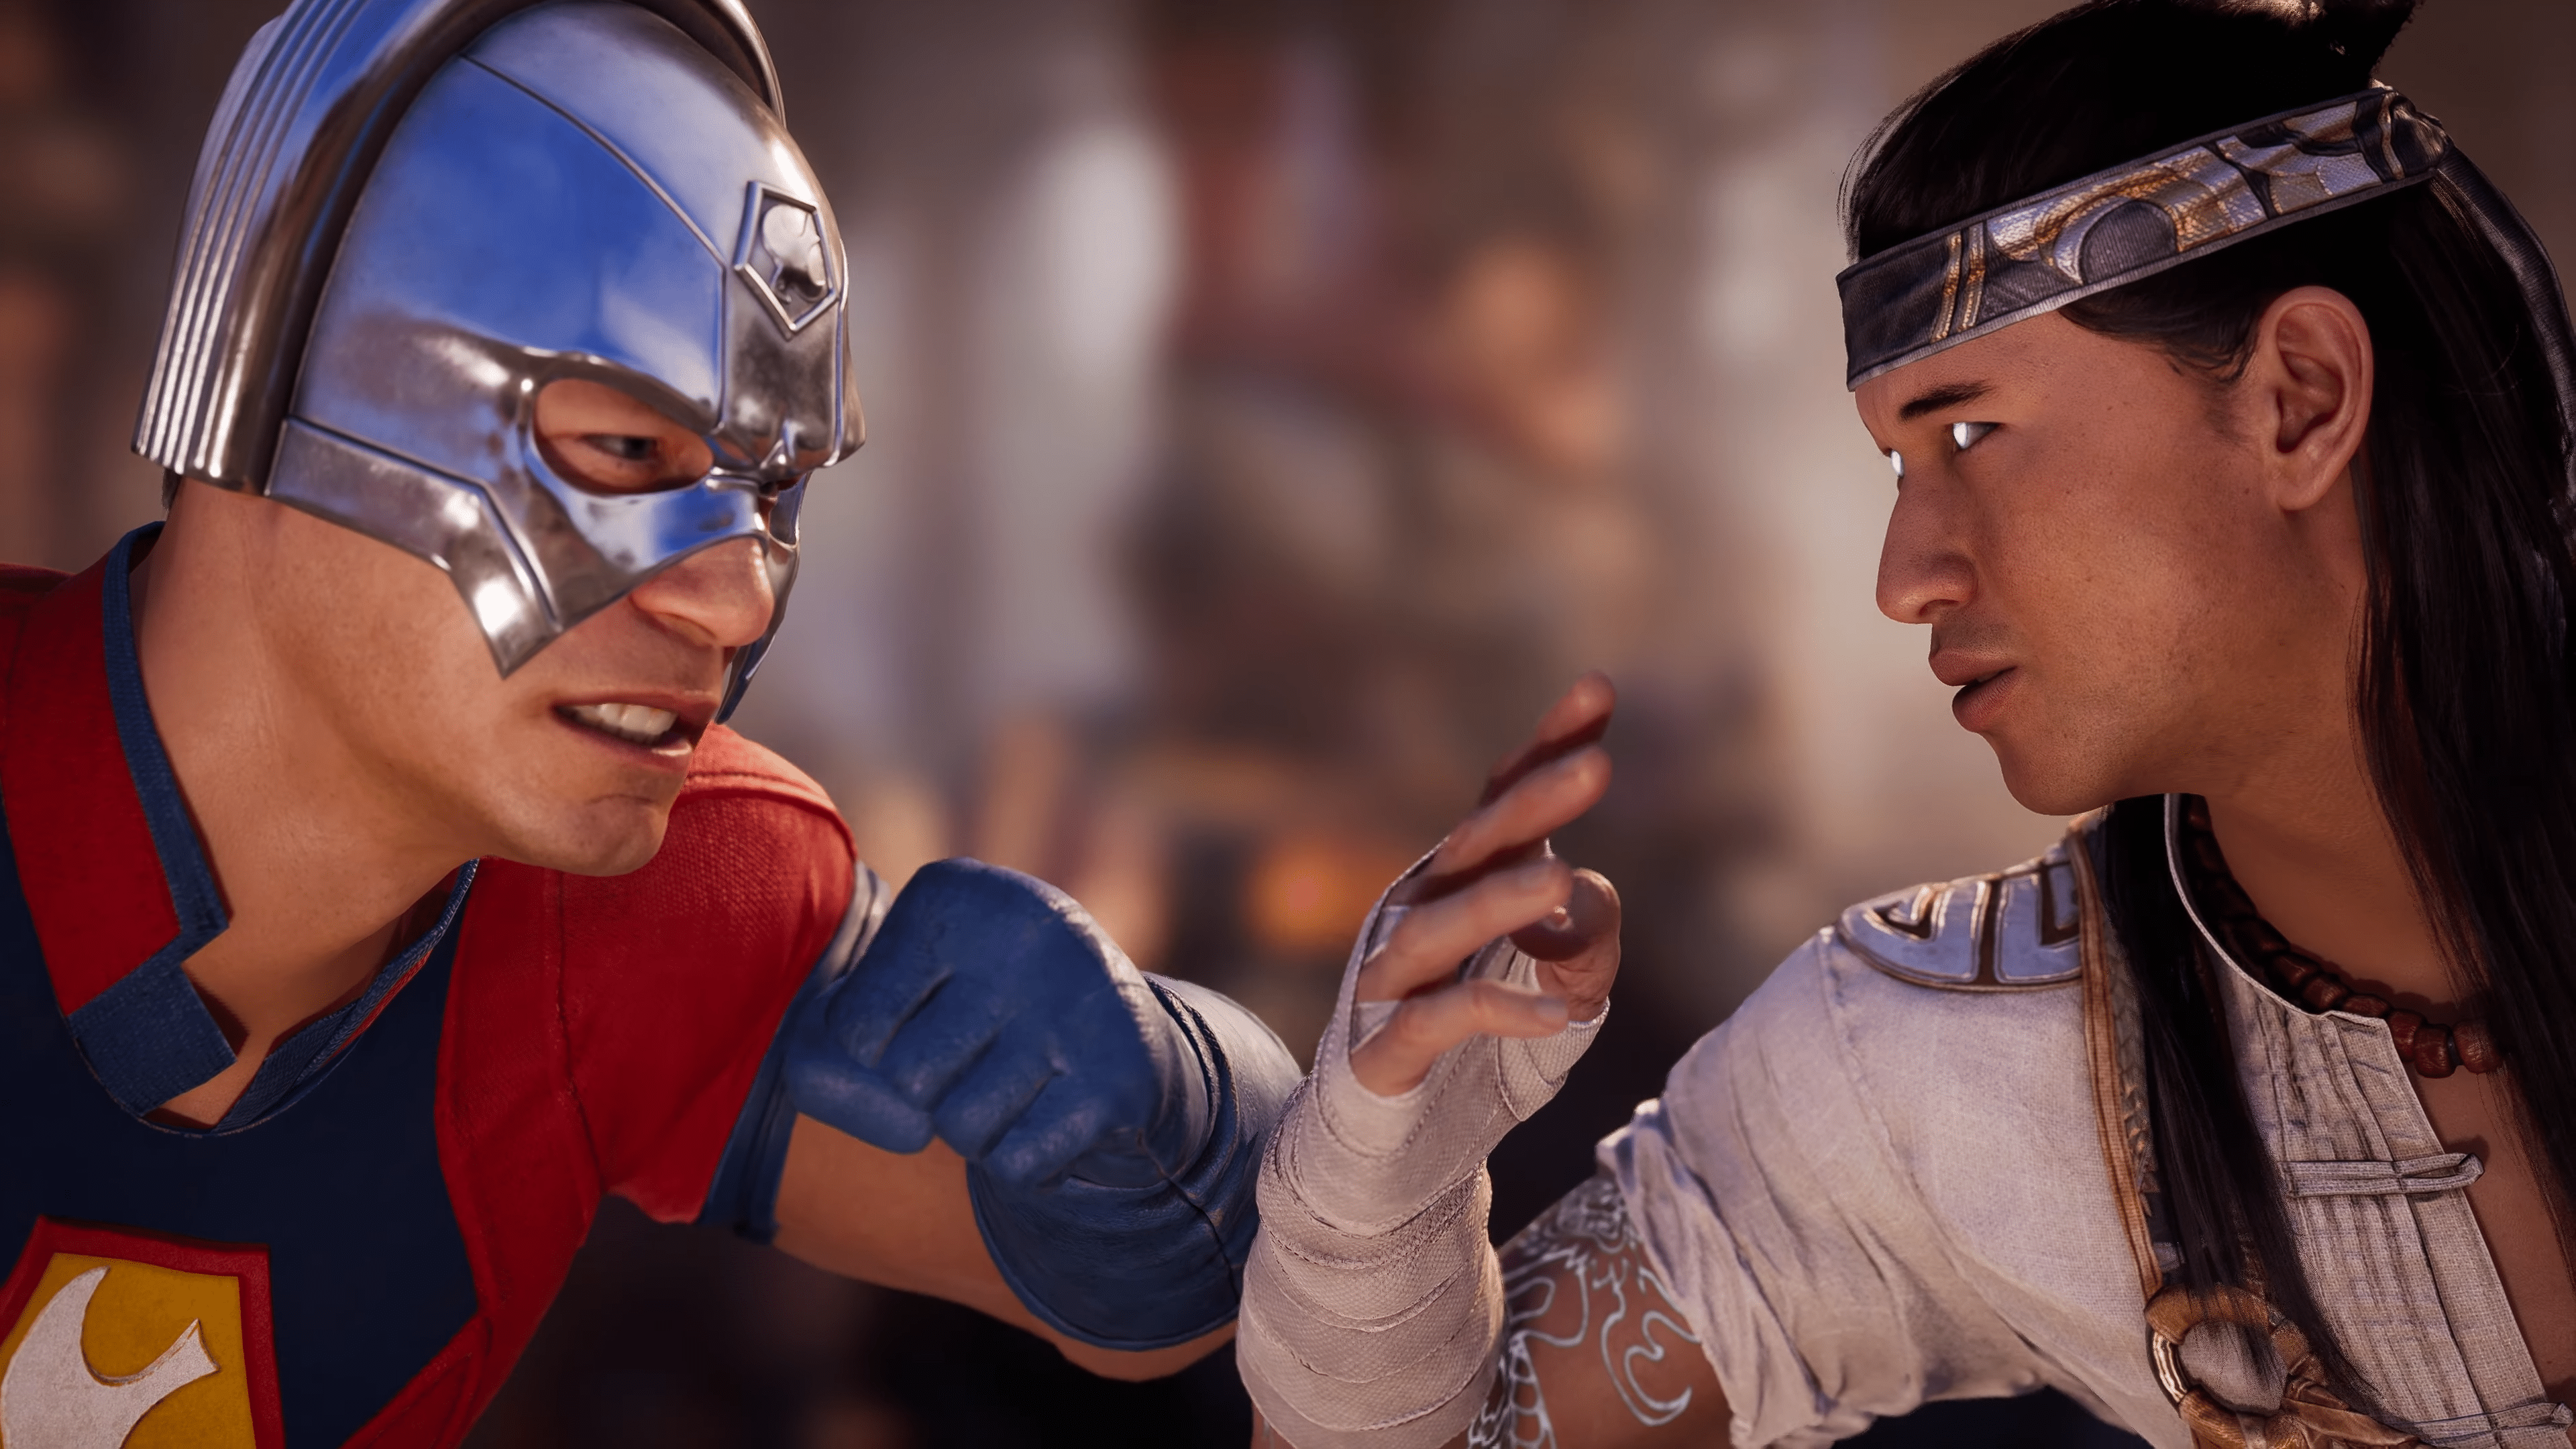 Mortal Kombat 1 Peacemaker Gameplay Trailer Brings the Pain, Hits Early Access on Feb. 28